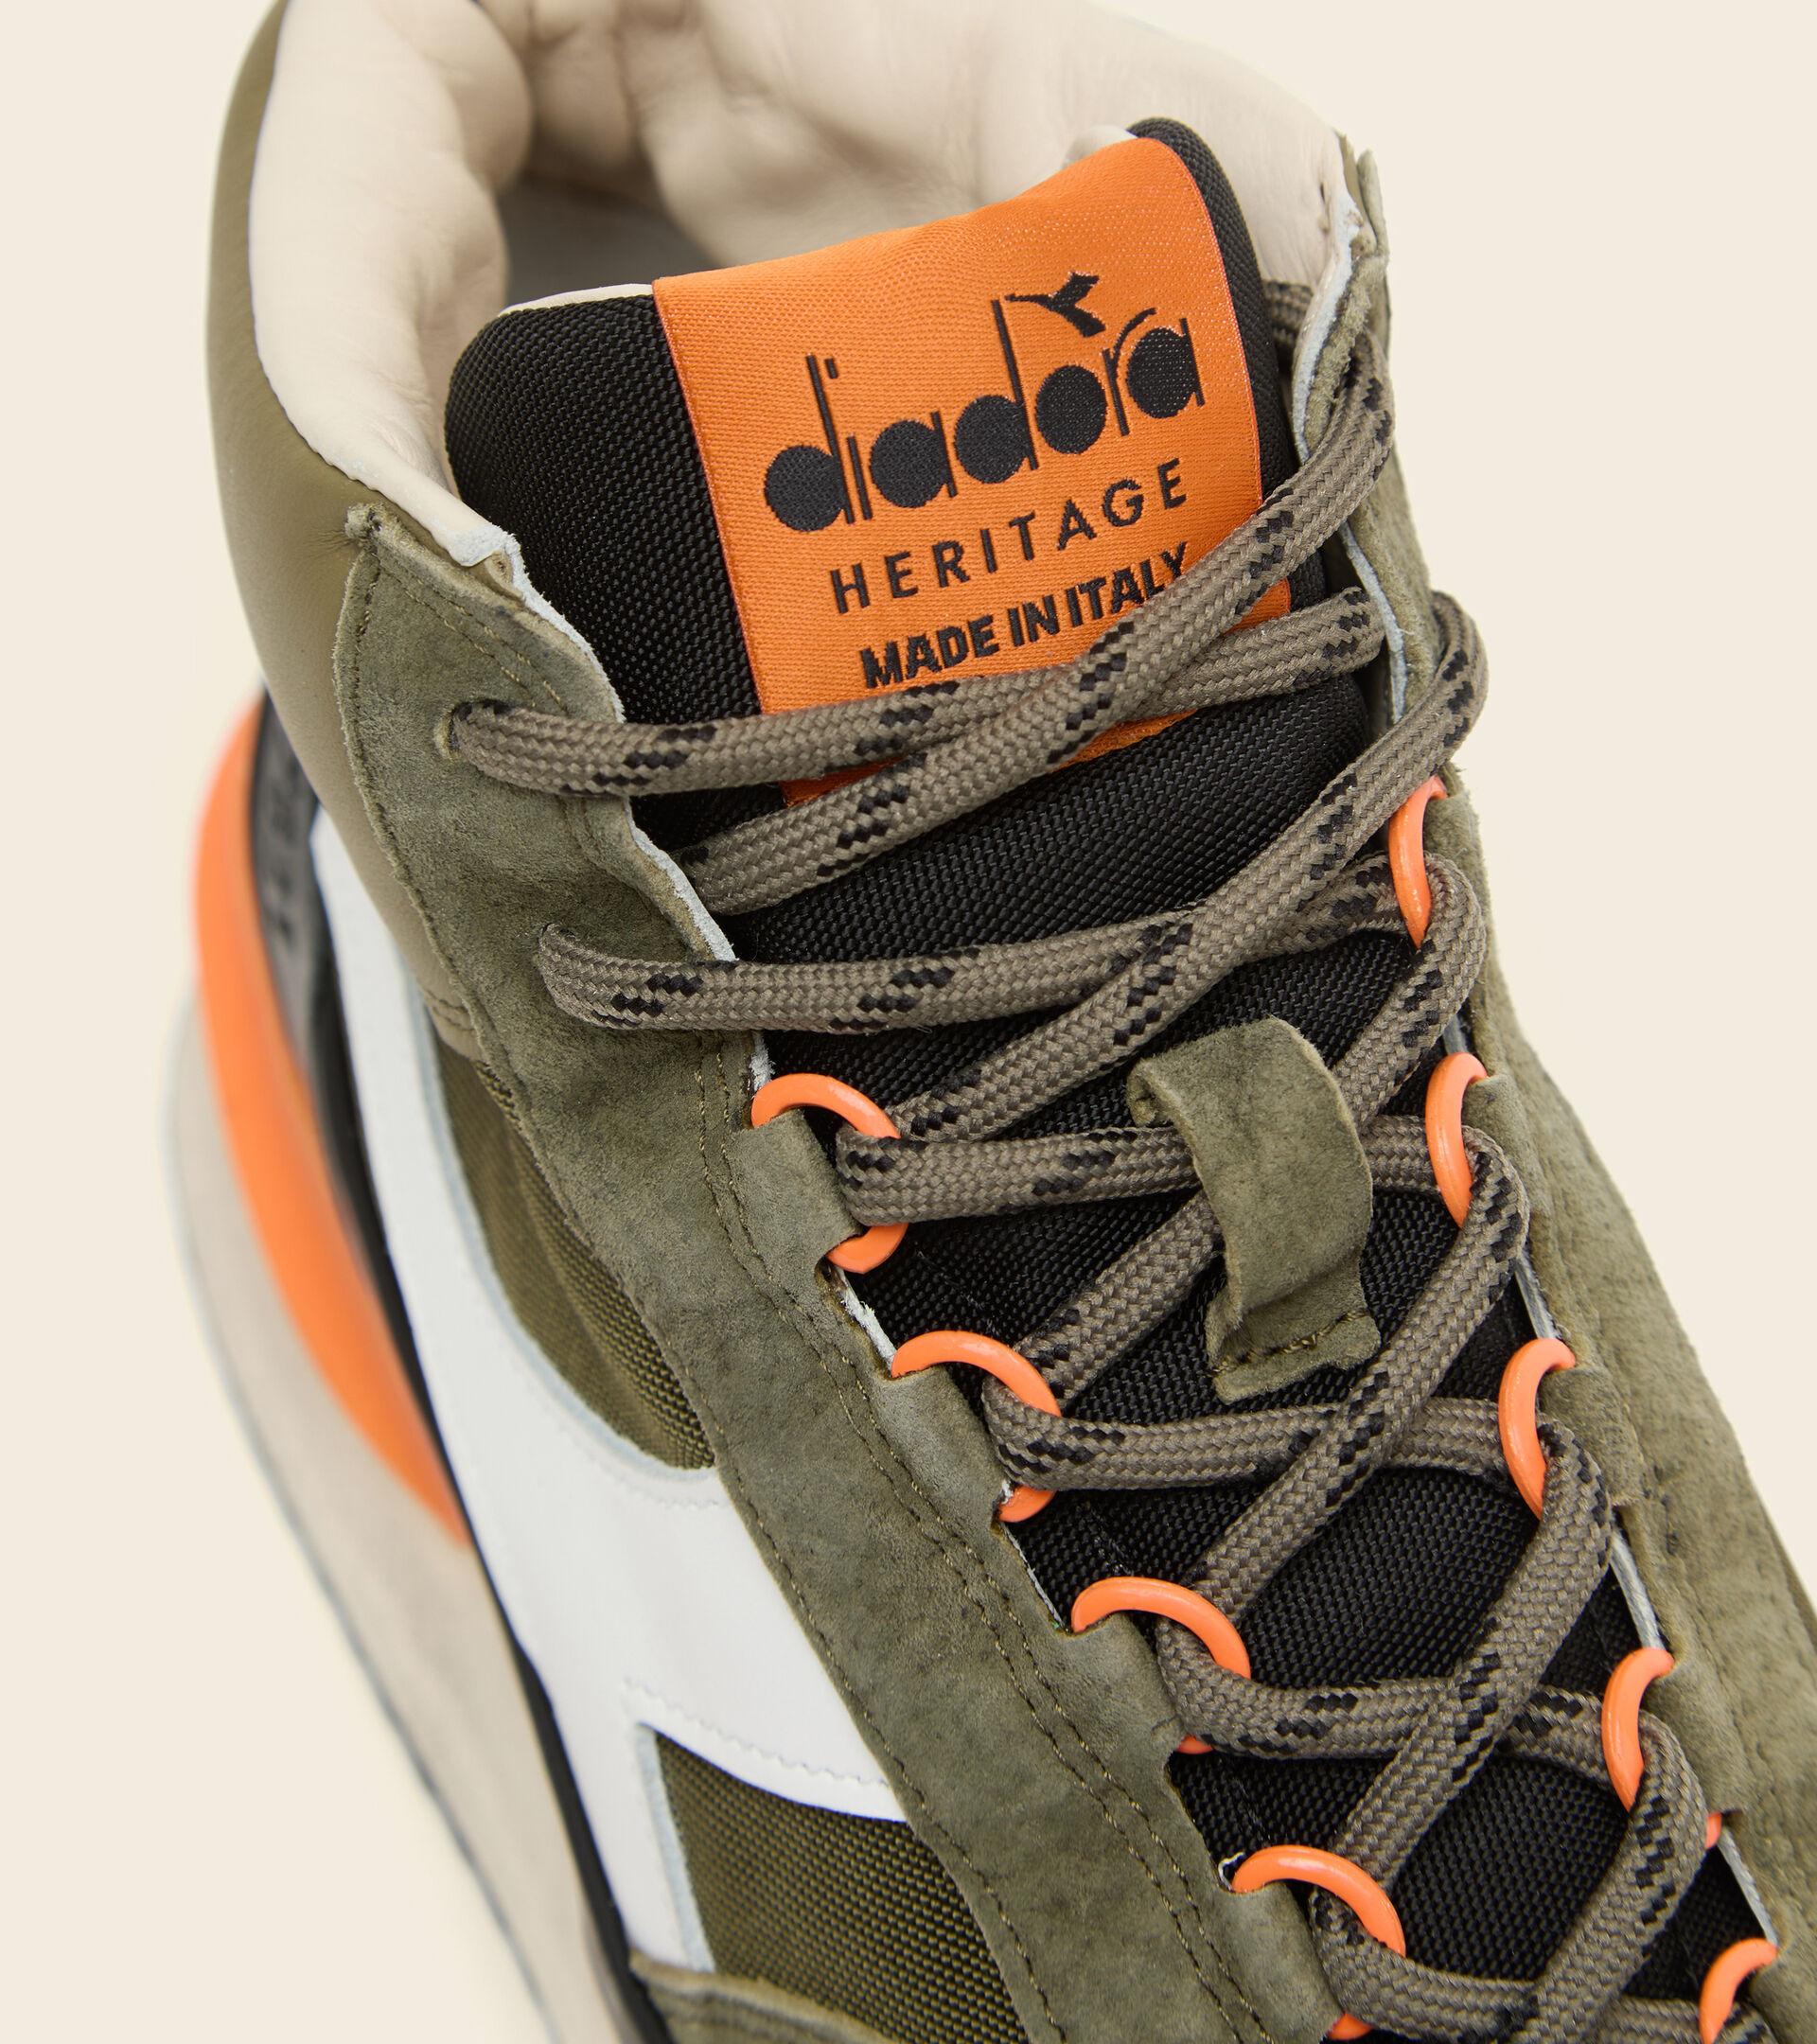 Chaussures Heritage Made in Italy - Homme EQUIPE MID MAD ITALIA NUBUCK SW OLIVINE - Diadora